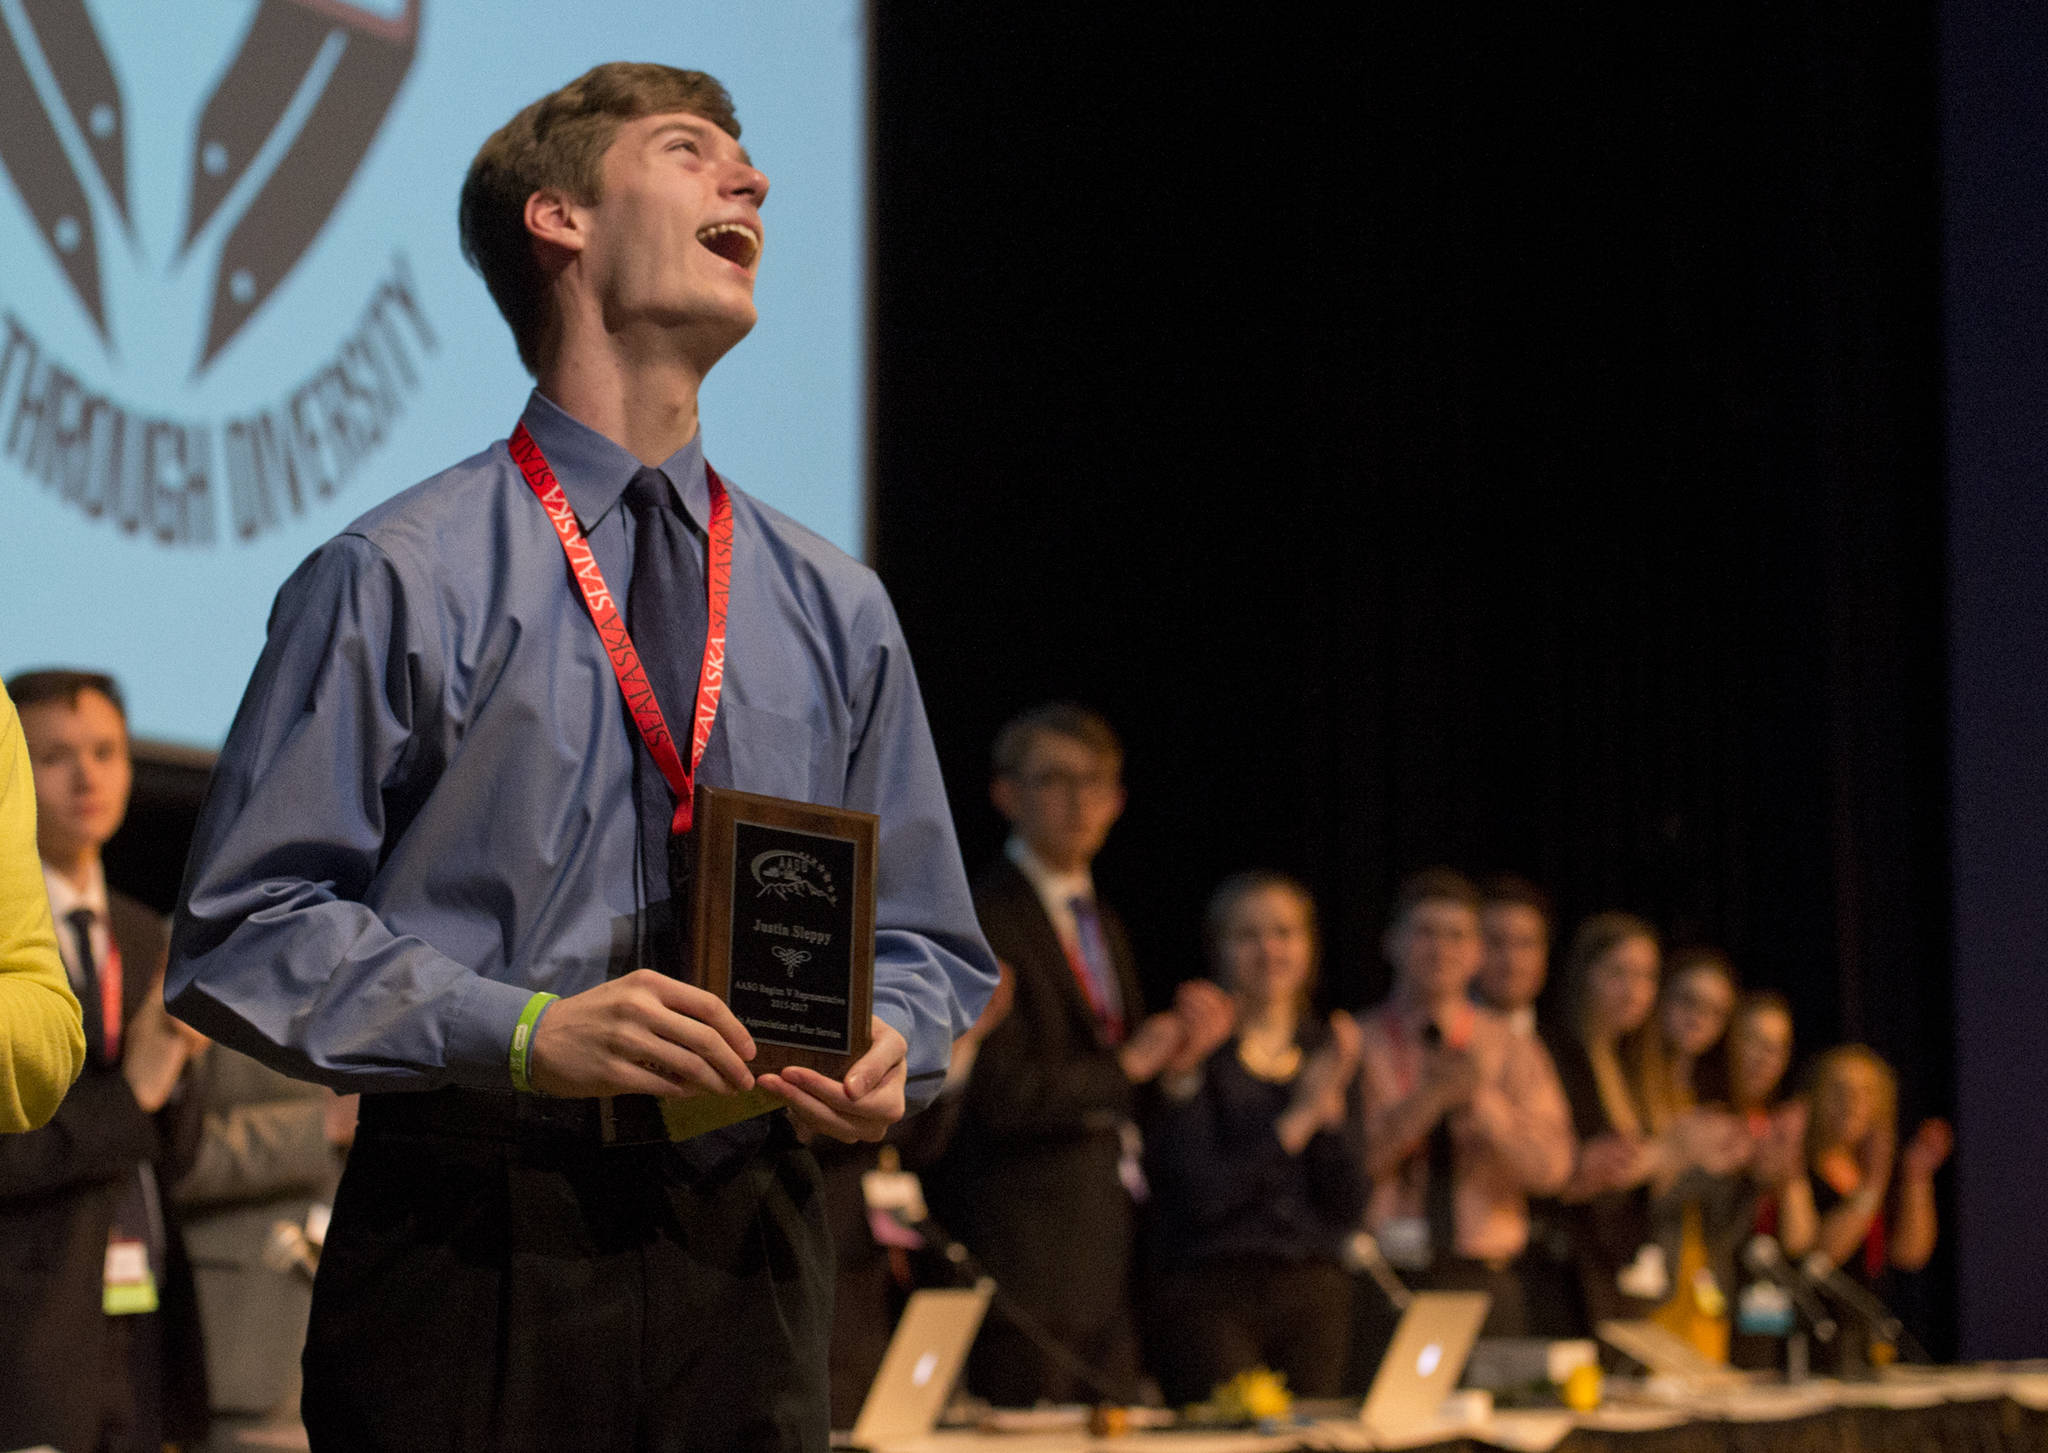 Justin Sleppy, a senior at Thunder Mountain High School, reacts to receiving a National Student Council Leader Award during the final day of the Alaska Association of Student Governments Spring 2017 Conference at TMHS on Wednesday. (Michael Penn | Juneau Empire)